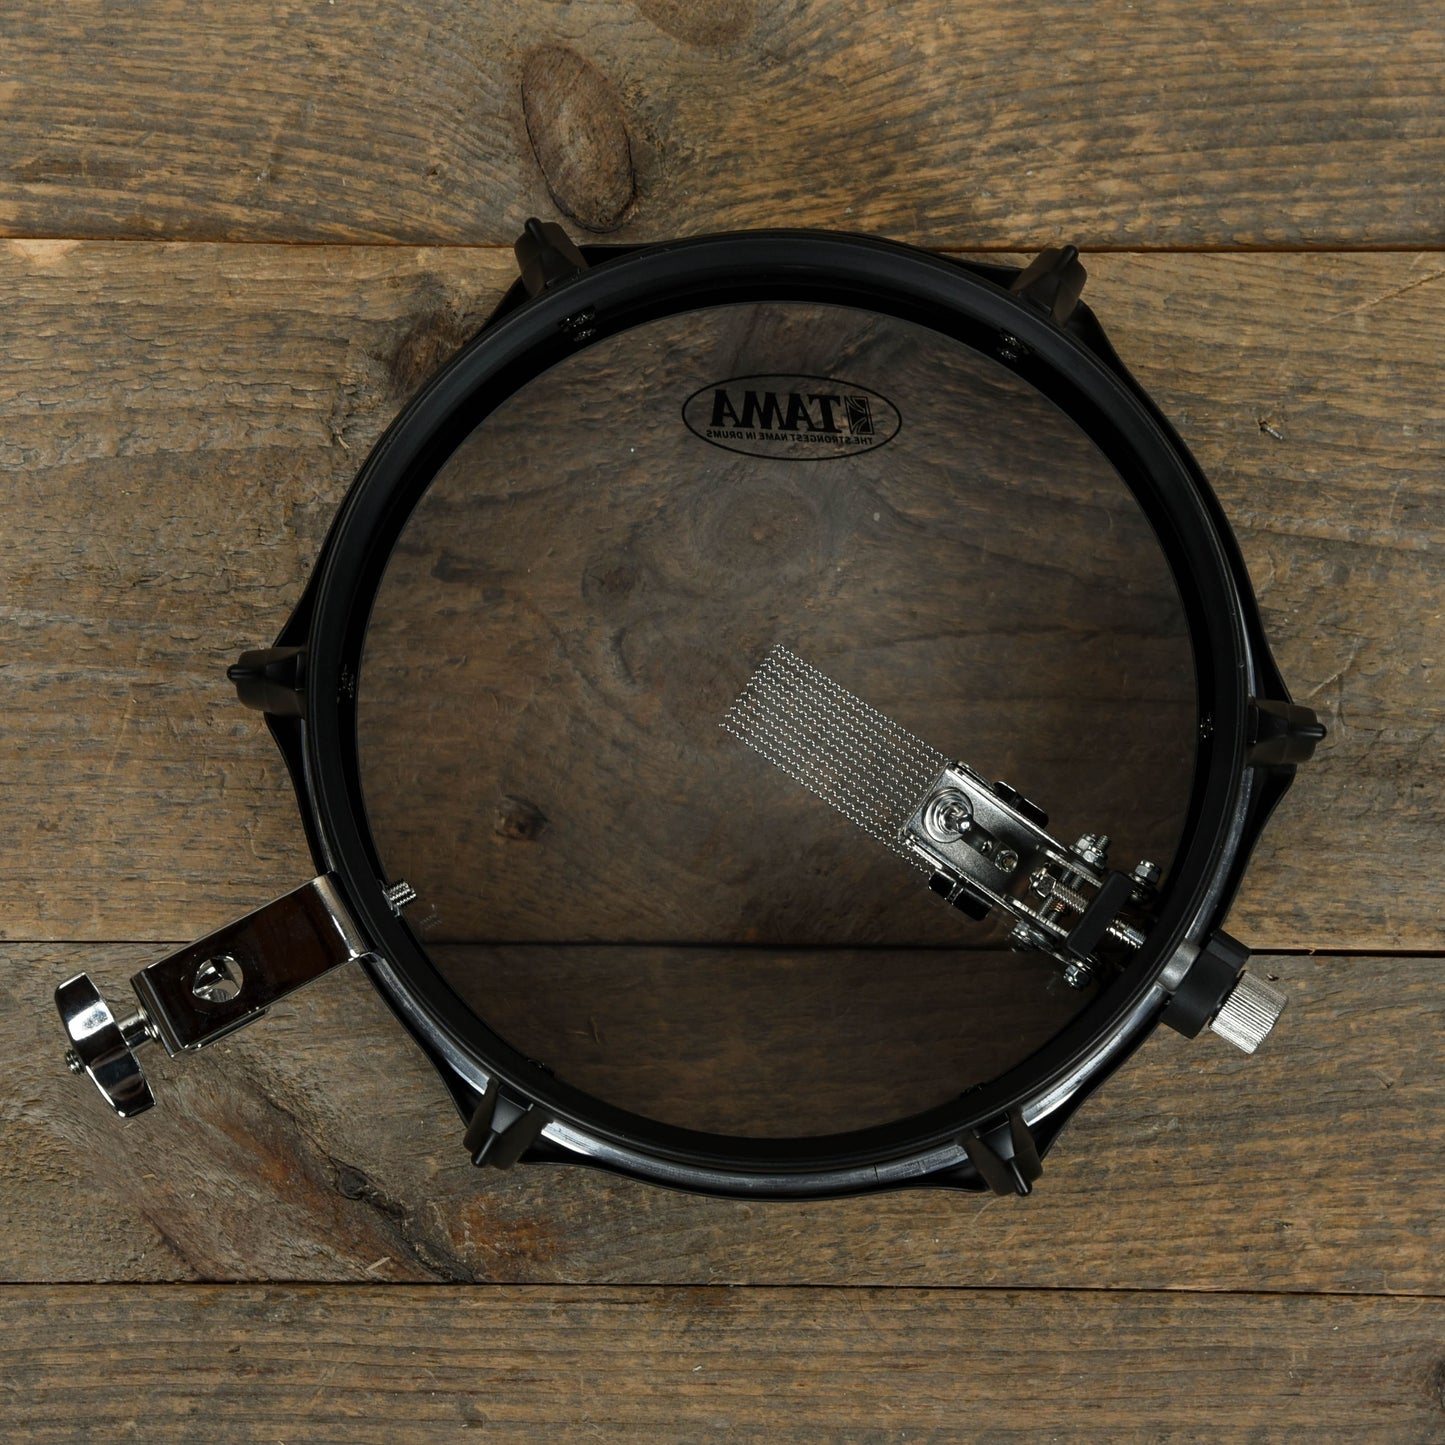 Tama 3x10 Metalworks "Effect" Series Snare Drum Matte Black w/Black Hdw Drums and Percussion / Acoustic Drums / Snare